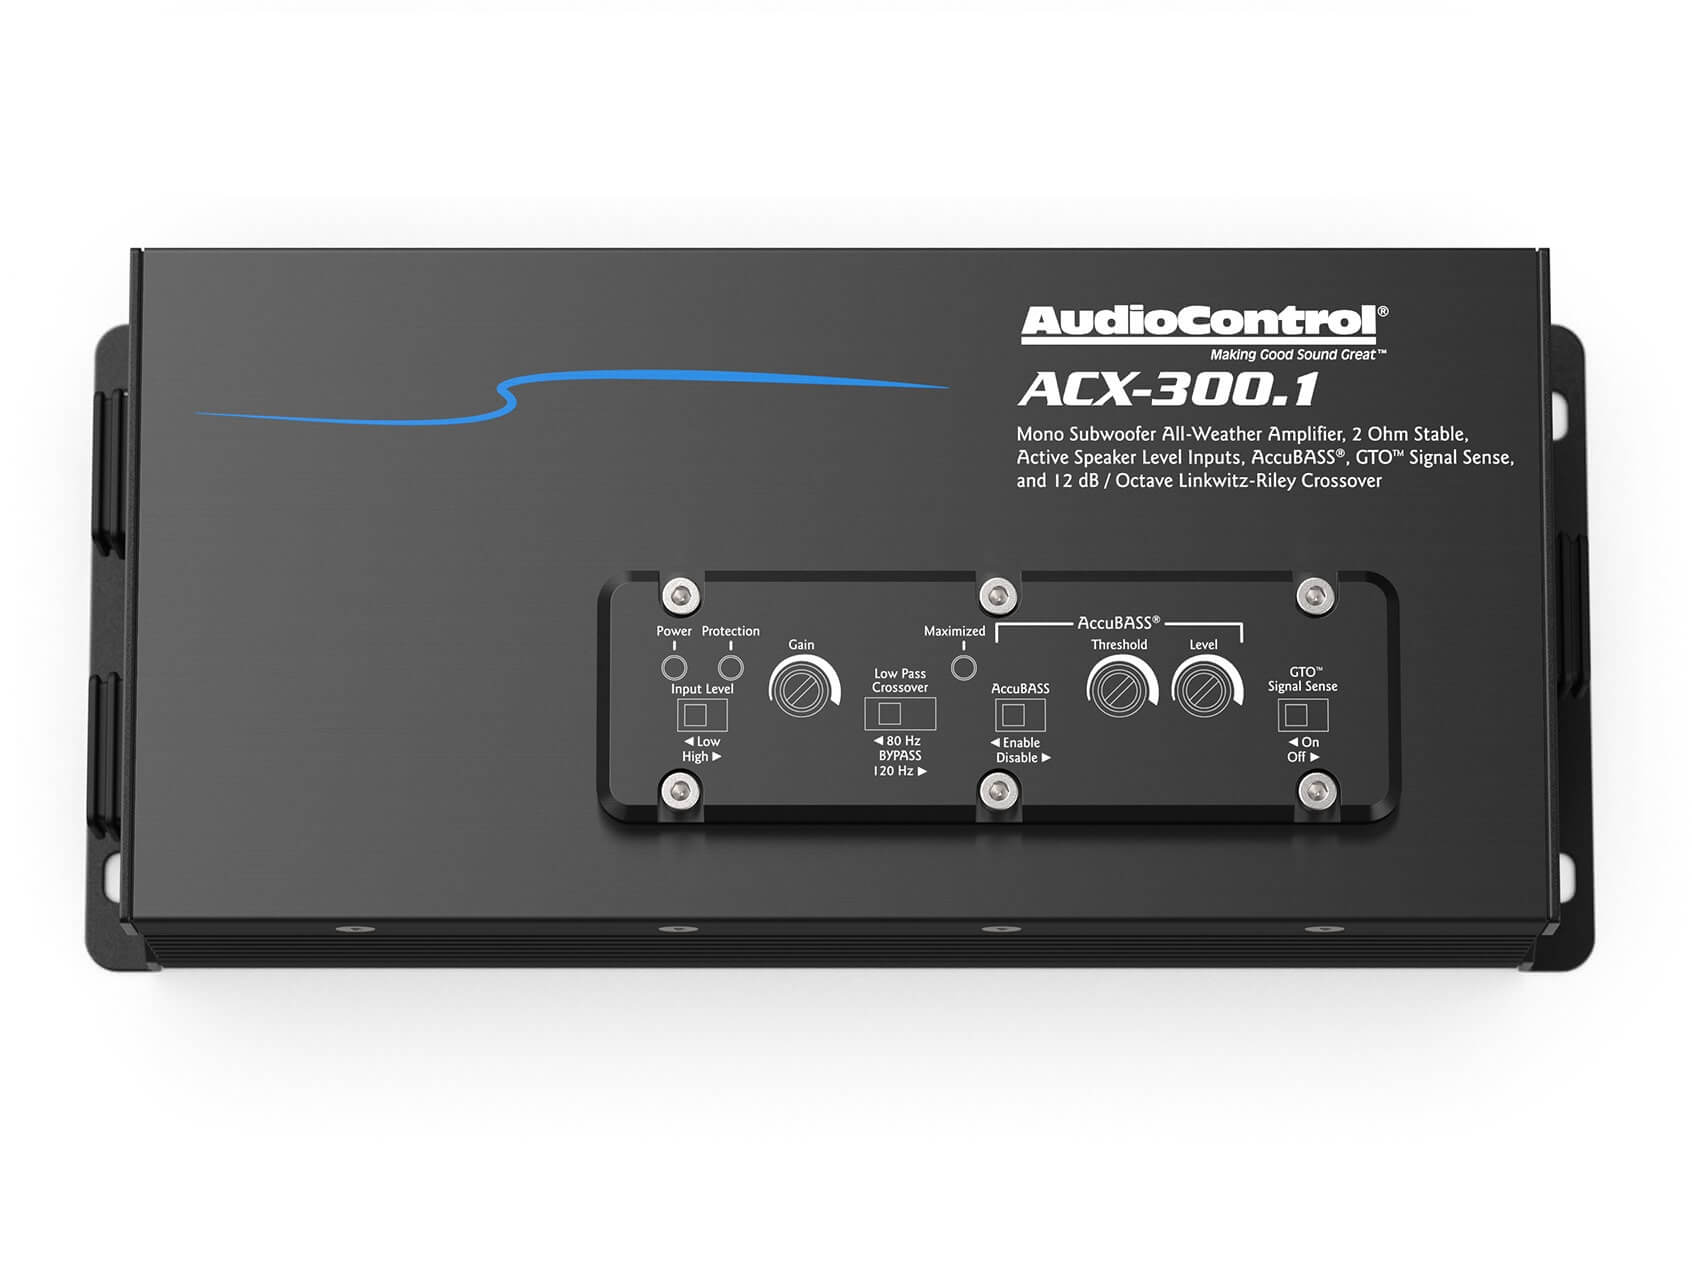 AudioControl ACX-300.1 - Top / With Cover